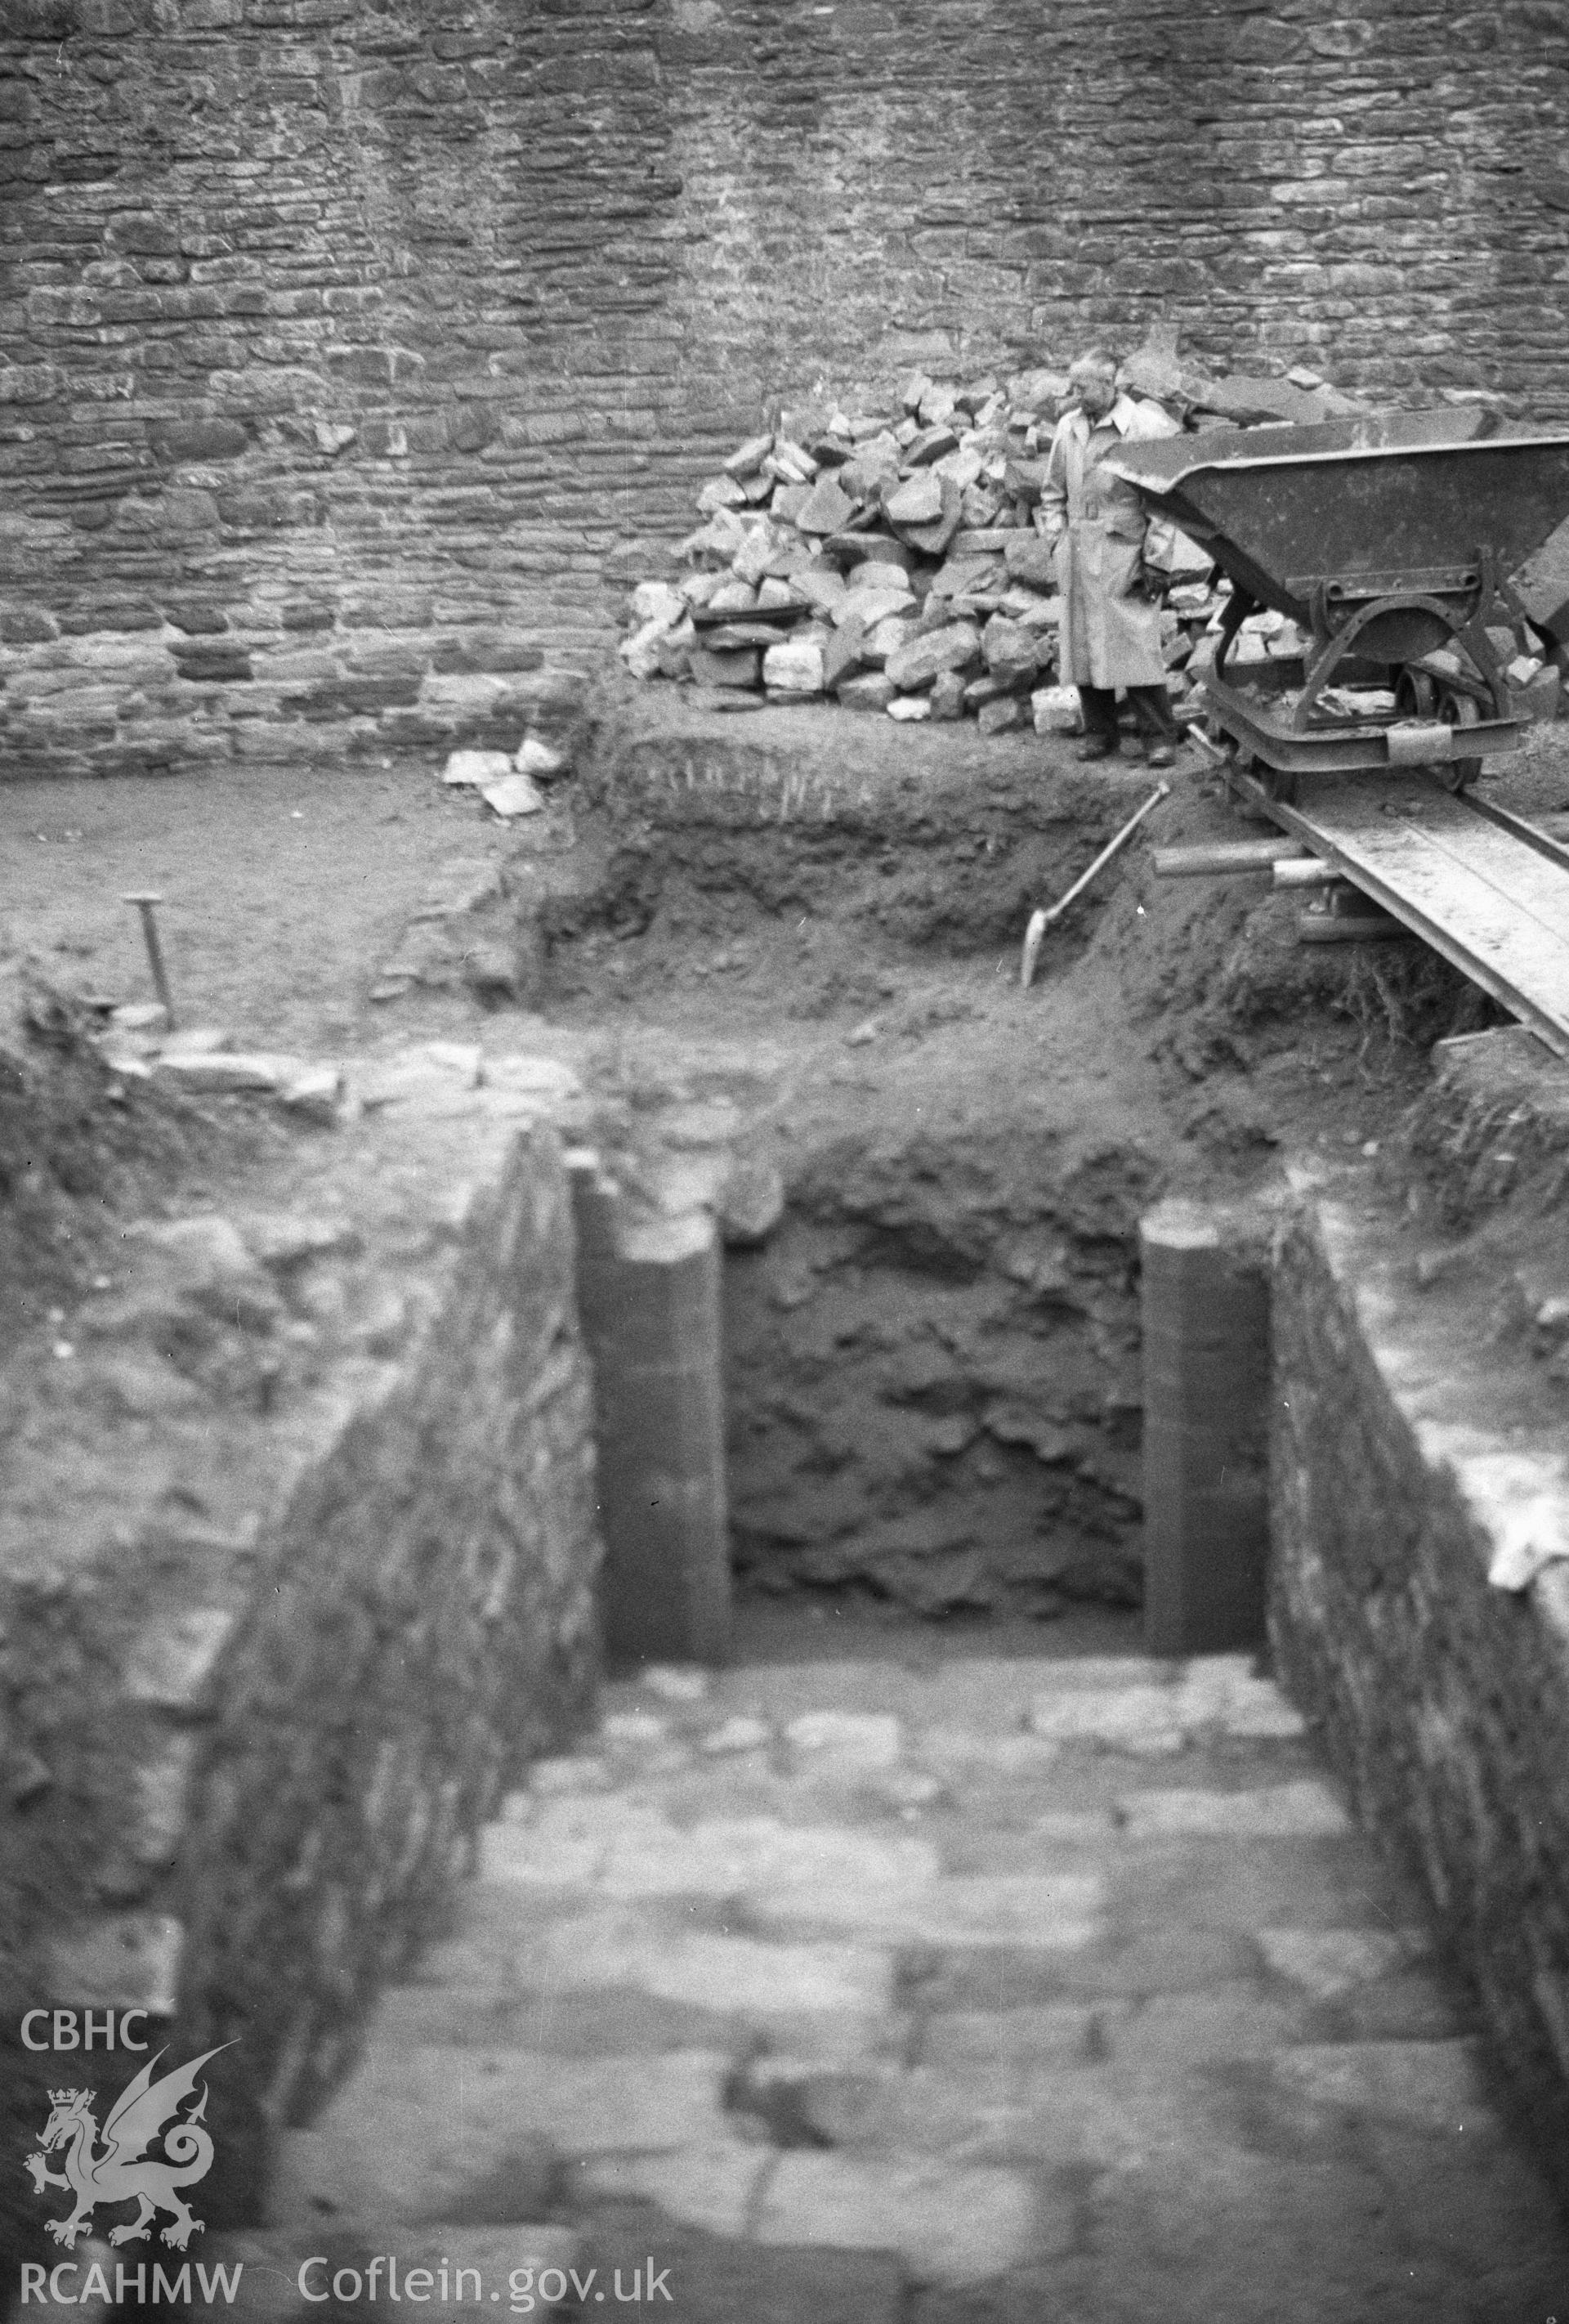 Digital copy of a nitrate negative showing view of excavation at the Skenfrith Castle site taken by Leonard Monroe.